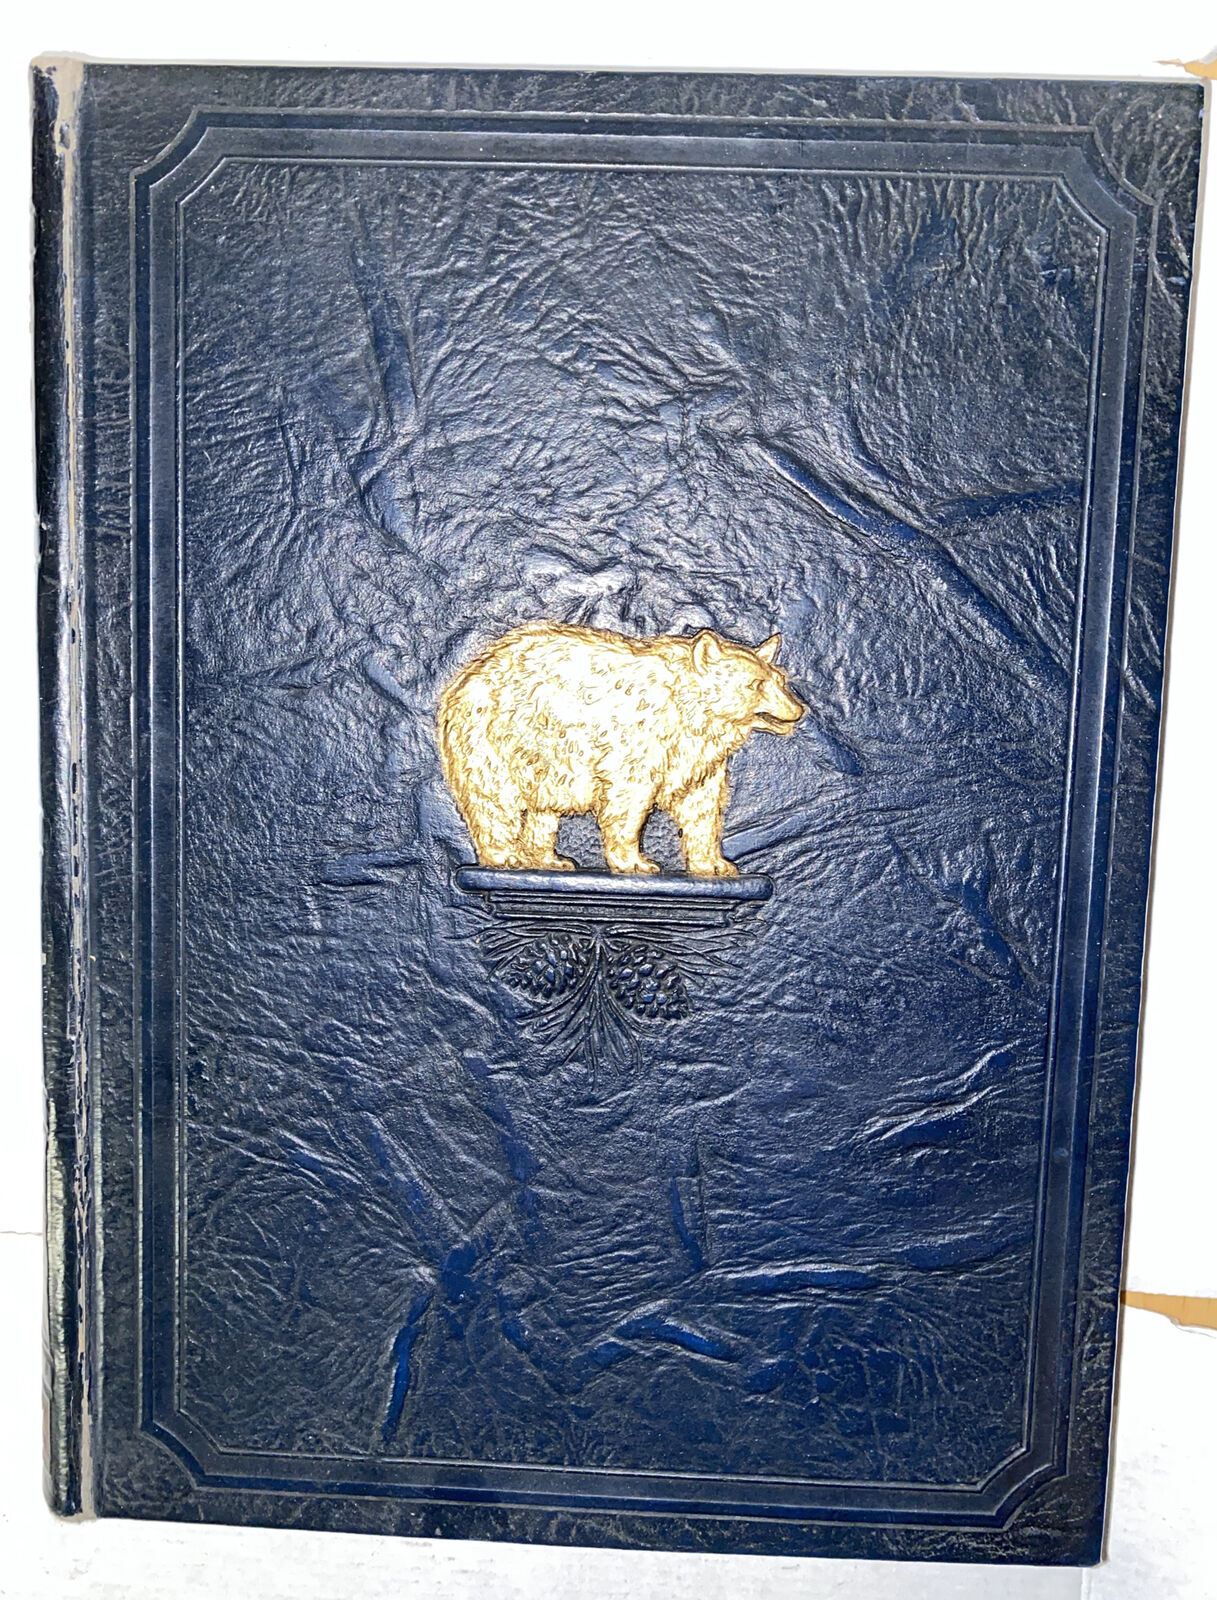 1928 THE UNIVERSITY OF CALIFORNIA YEAR BOOK - BLUE AND GOLD - VOLUME 55